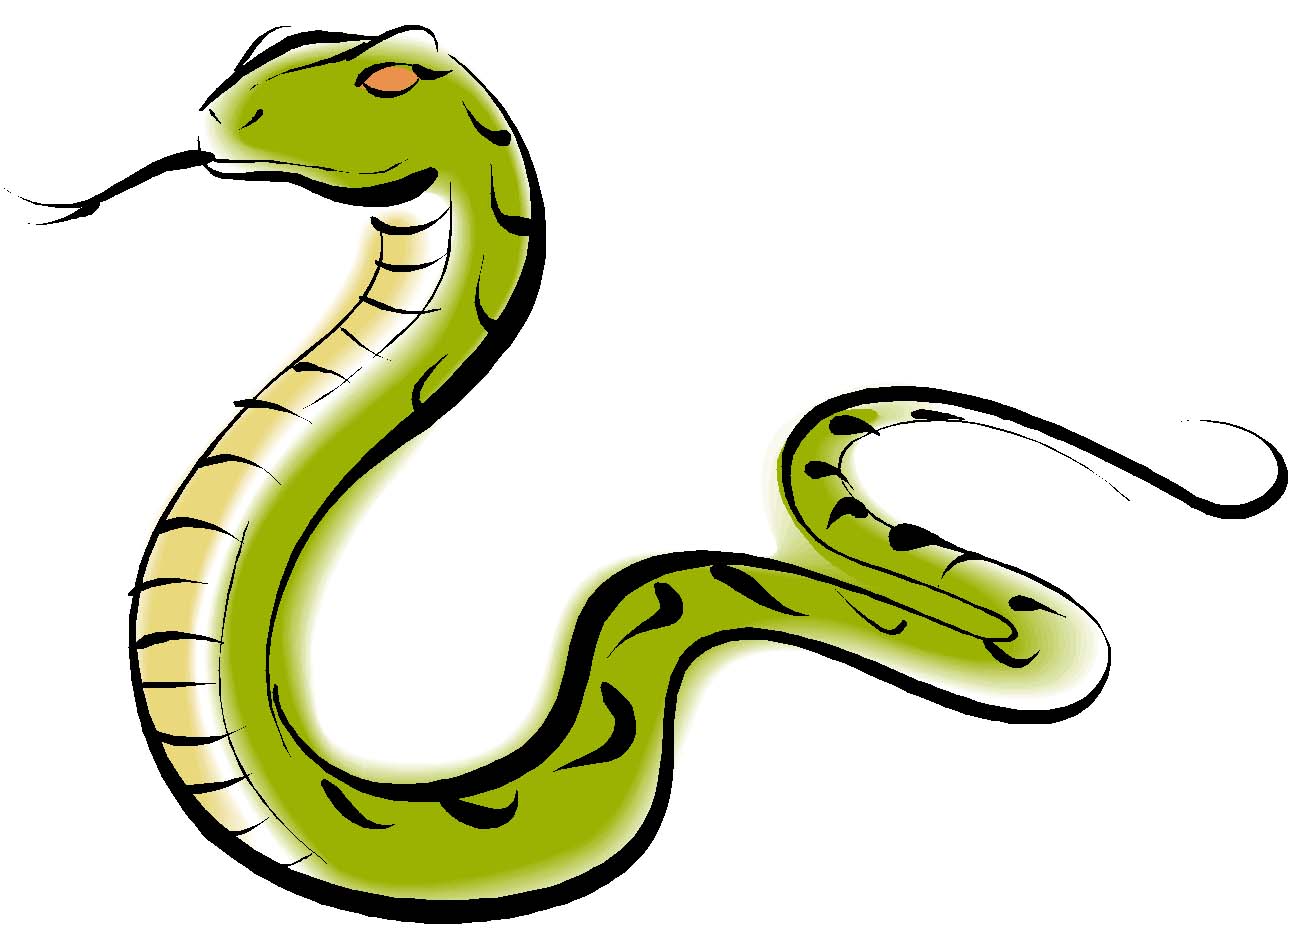 Cartoon snakes clip art page 2 snake images clipart free clip 4 ...